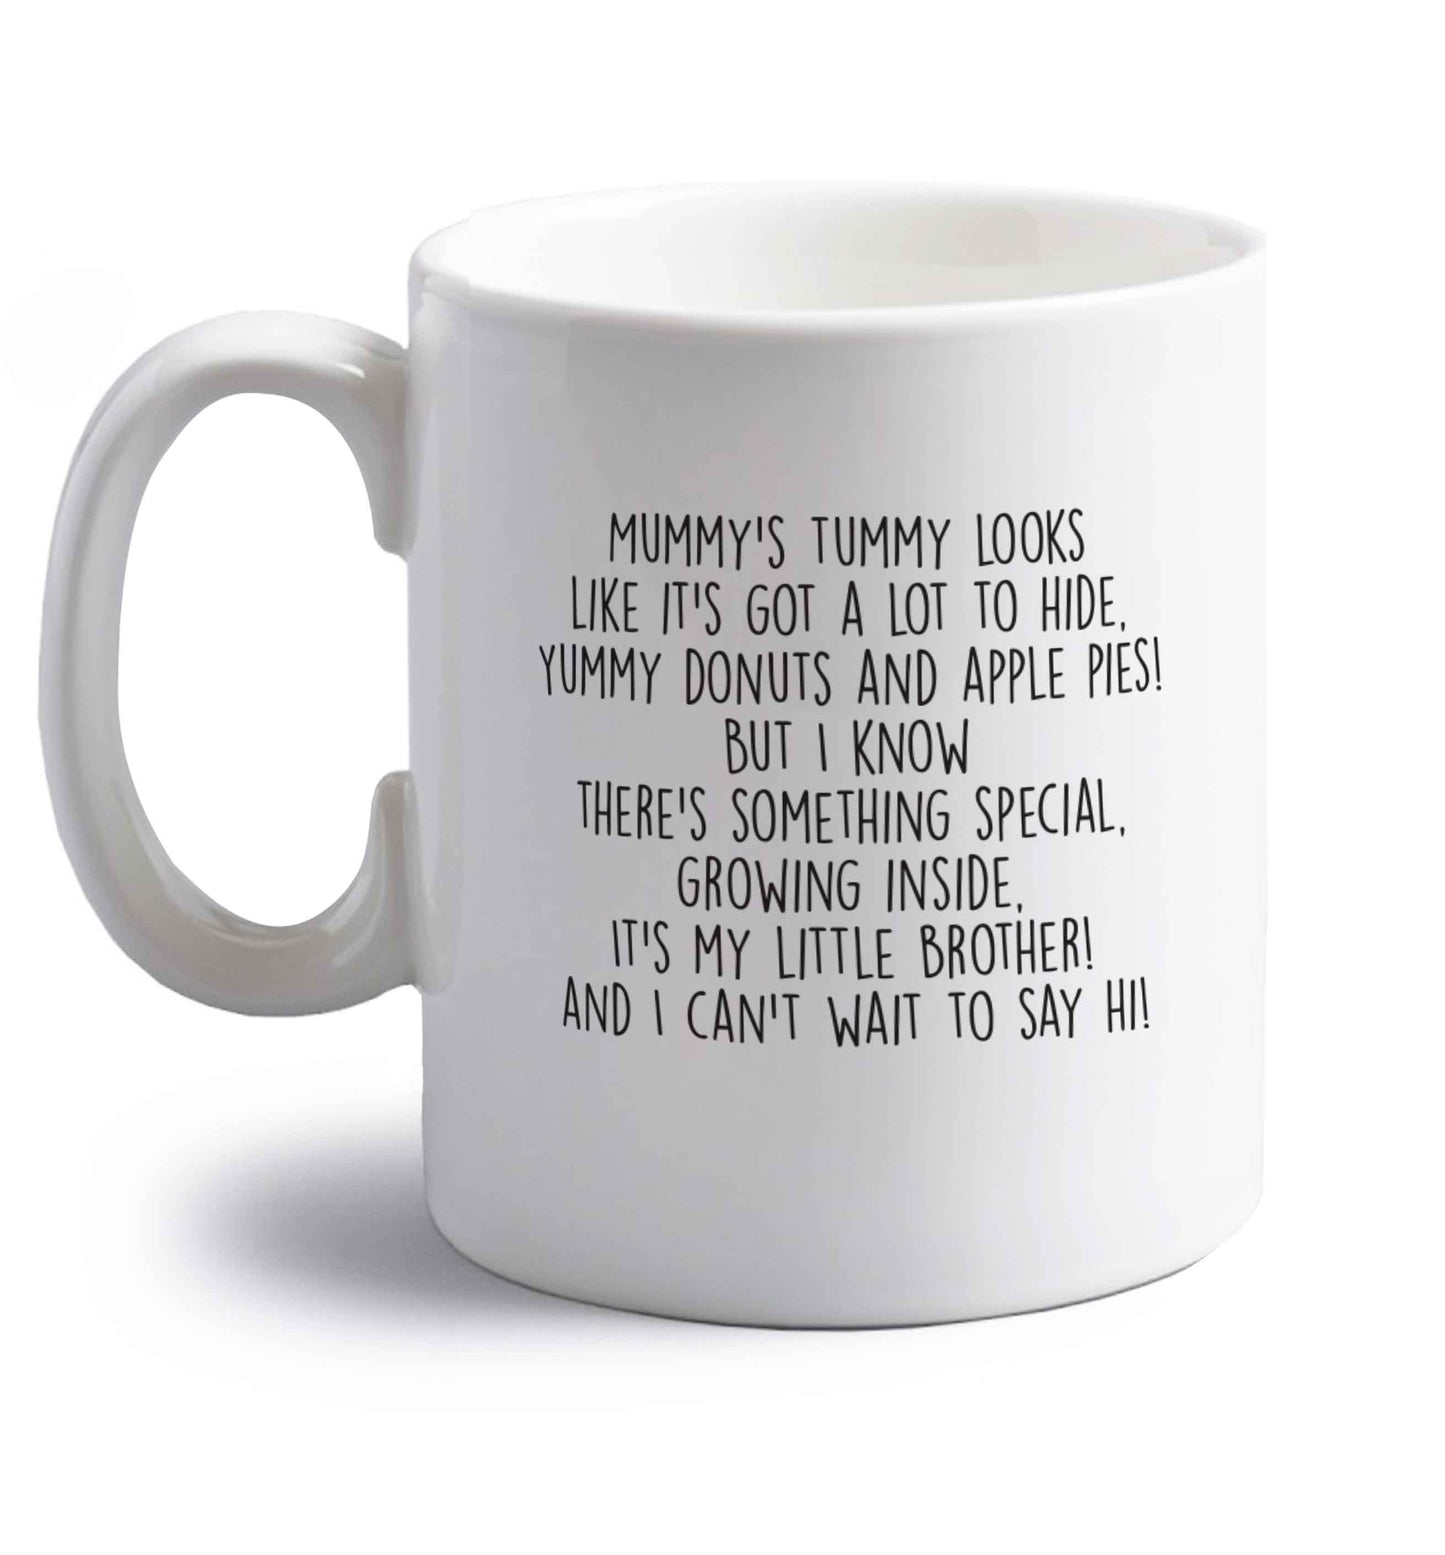 Something special growing inside it's my little brother I can't wait to say hi! right handed white ceramic mug 